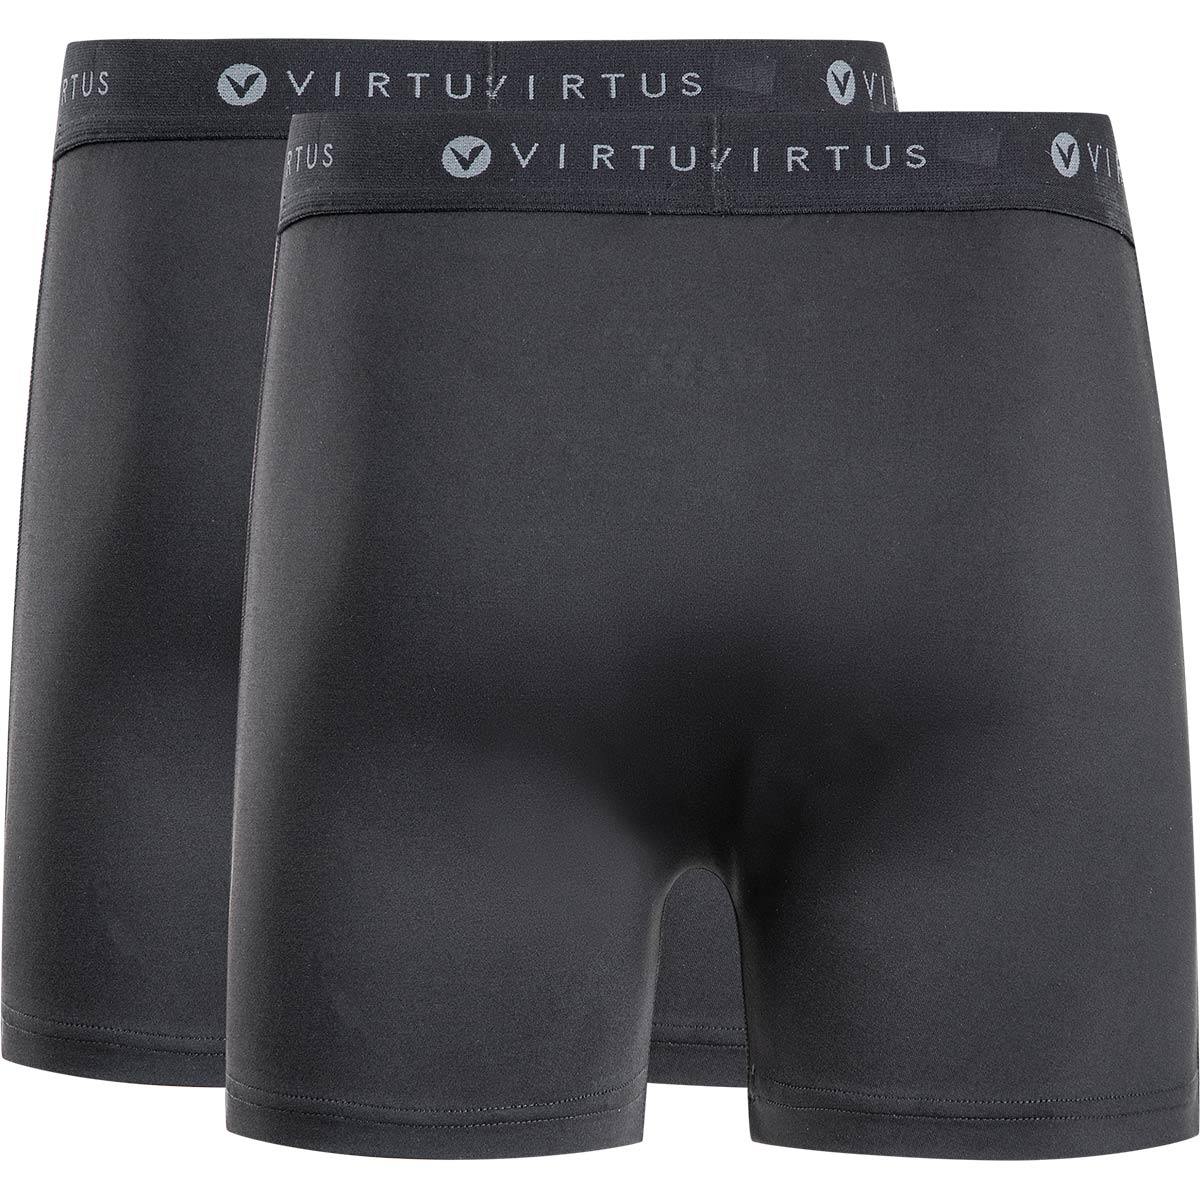 Whistler Outdoors | Mens Underwear | Boxers Shorts 